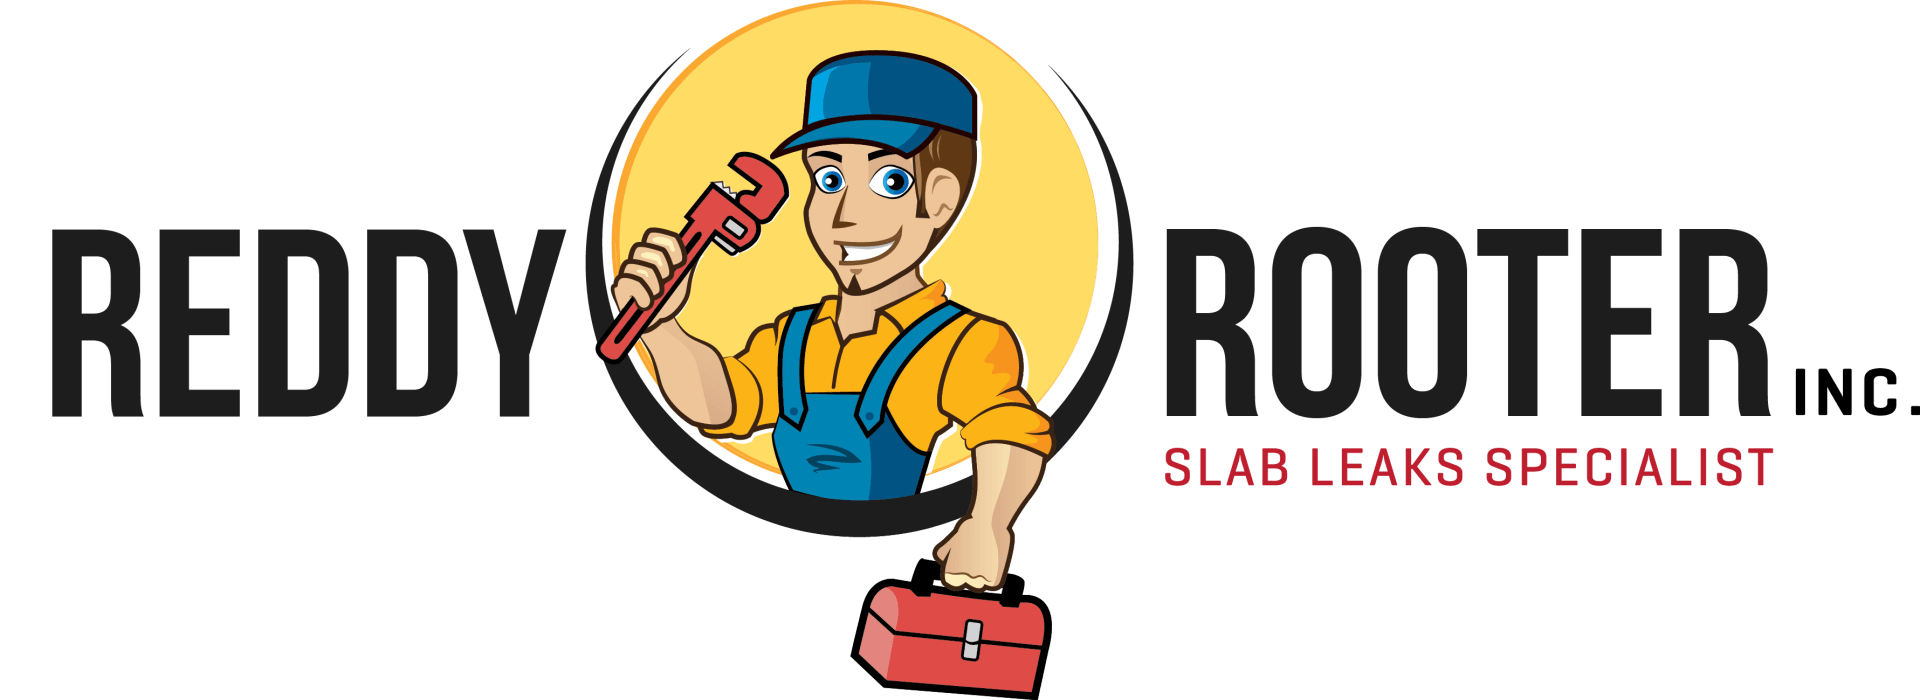 The logo for reddy rooter inc. shows a plumber holding a wrench and a toolbox.